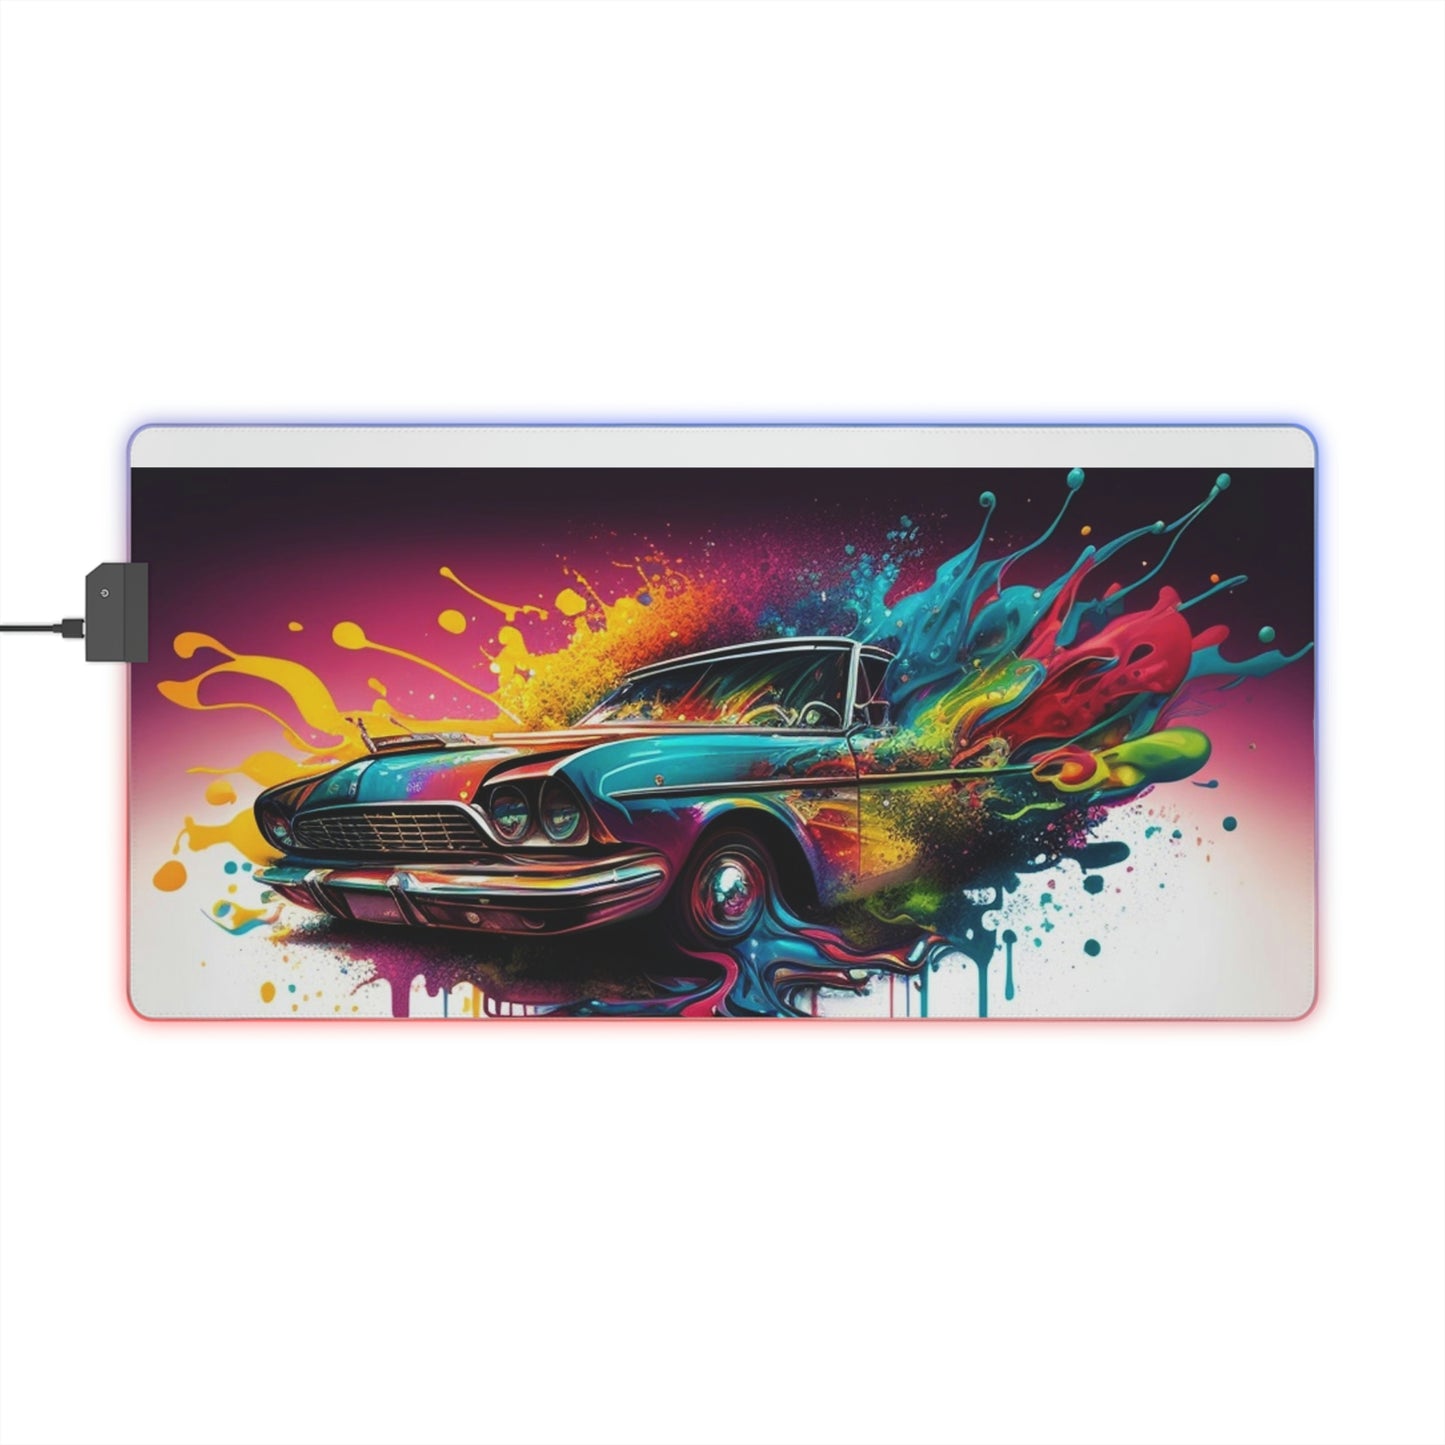 LED Gaming Mouse Pad Hotrod Color 1